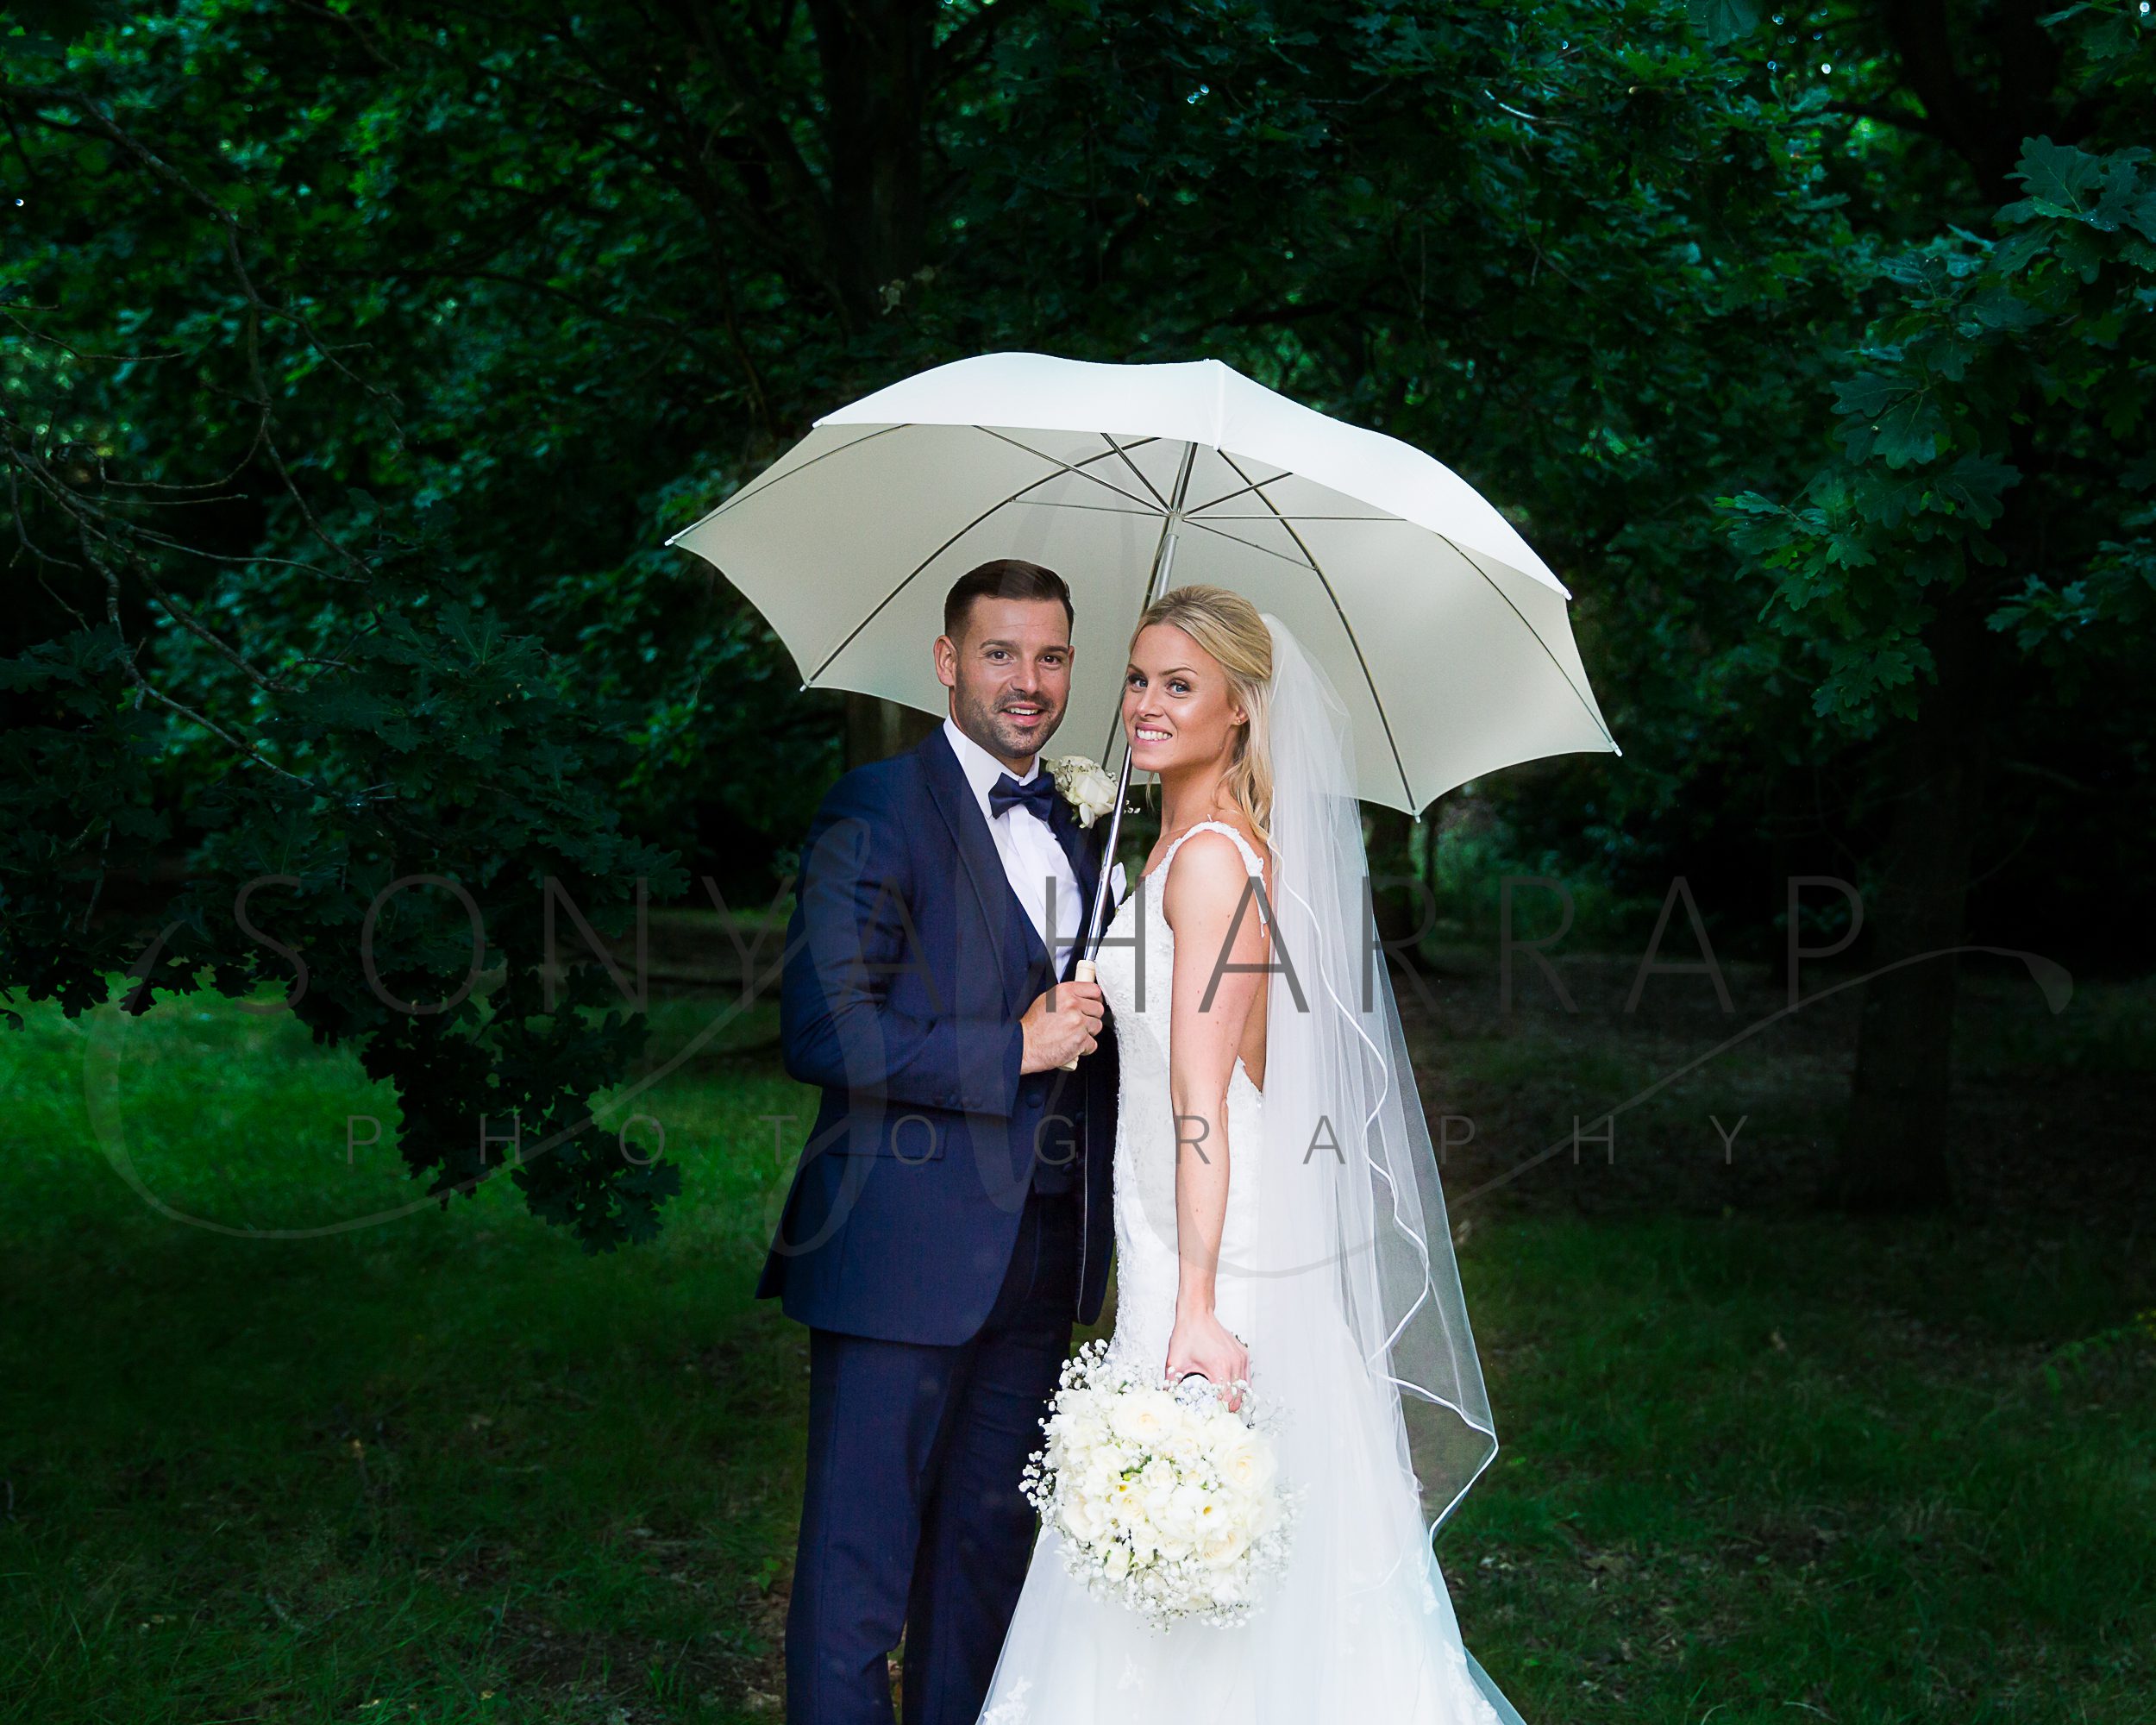 wedding photography by Sonya Harrap Hertfordshire church service of bride and groom and photos on theobald park herts under an umbrella